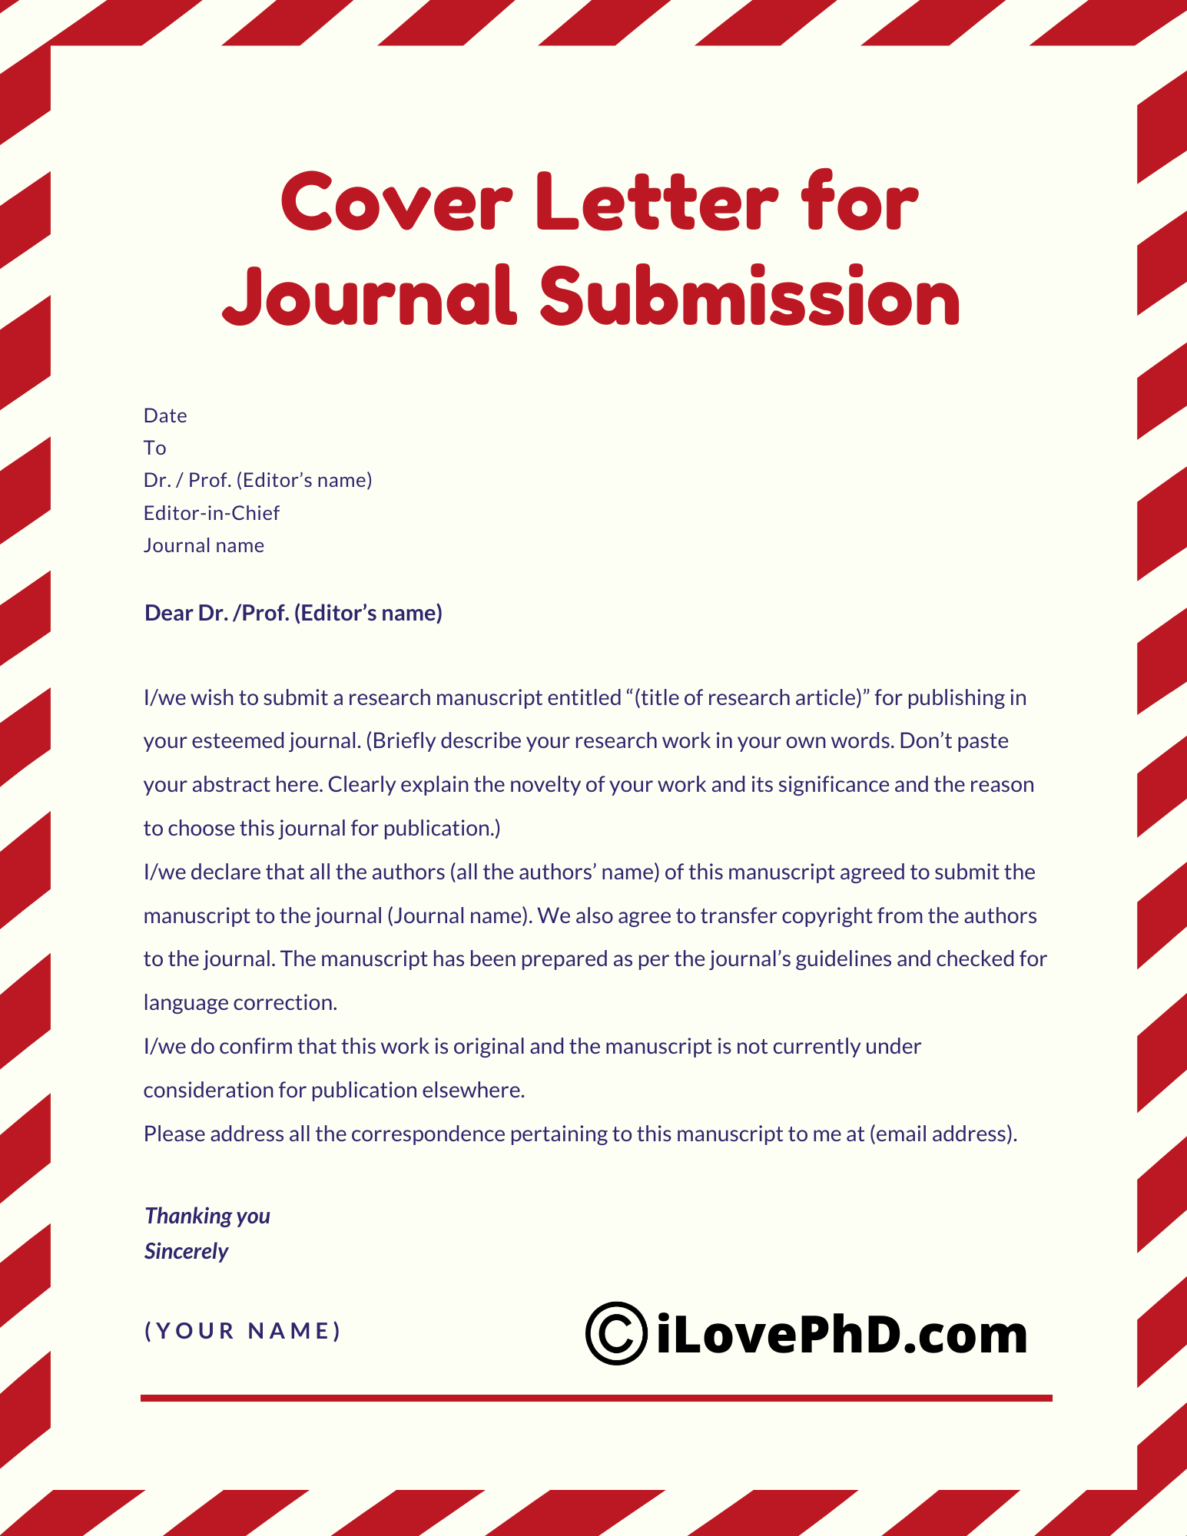 example cover letter manuscript submission